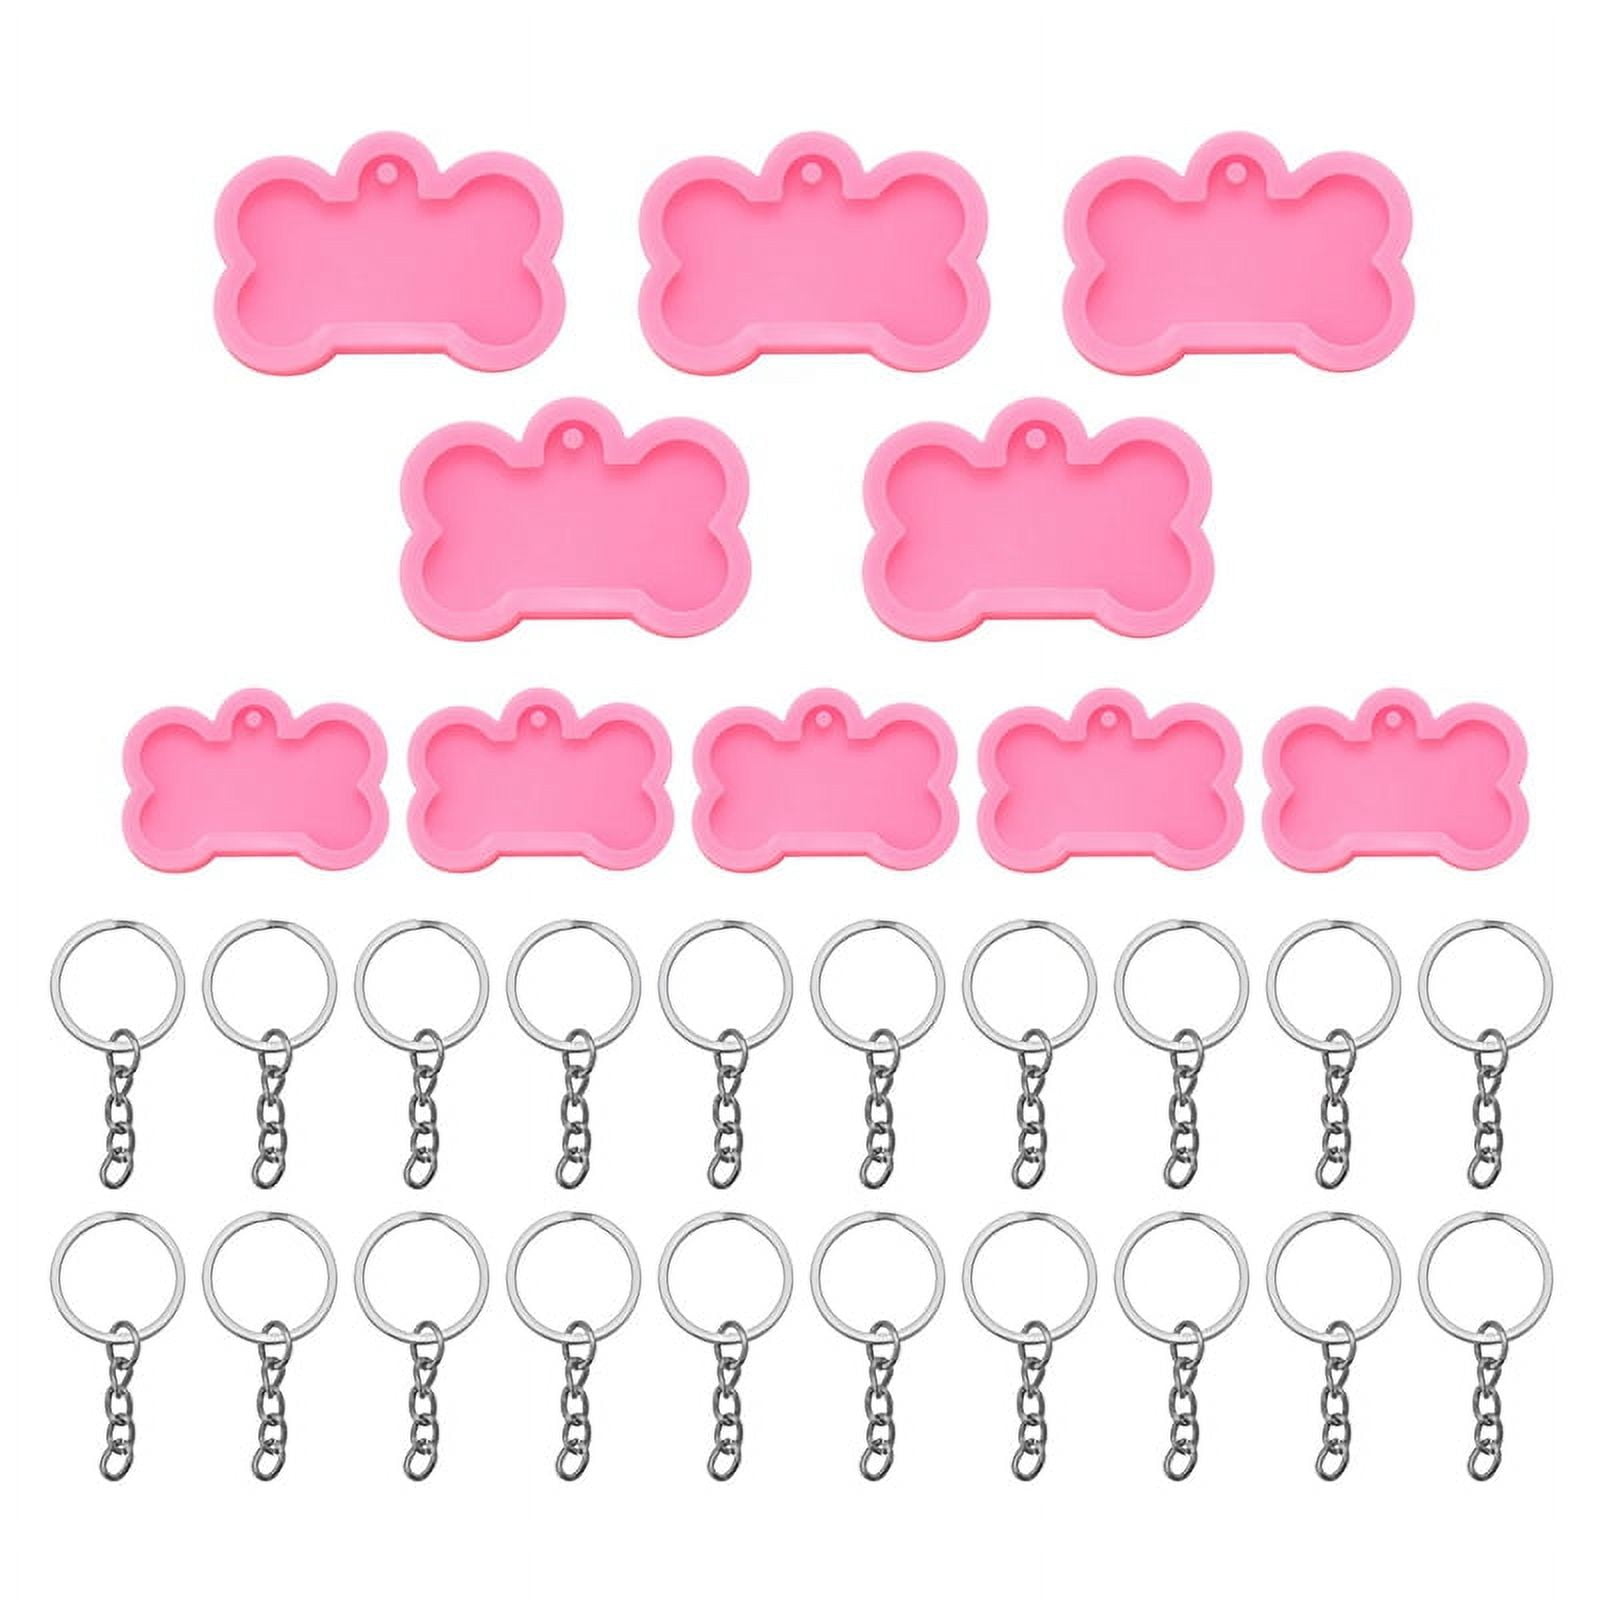 8x4.4x0.75 Small Dog Tag Shaped Silicone Mold For Epoxy Resin